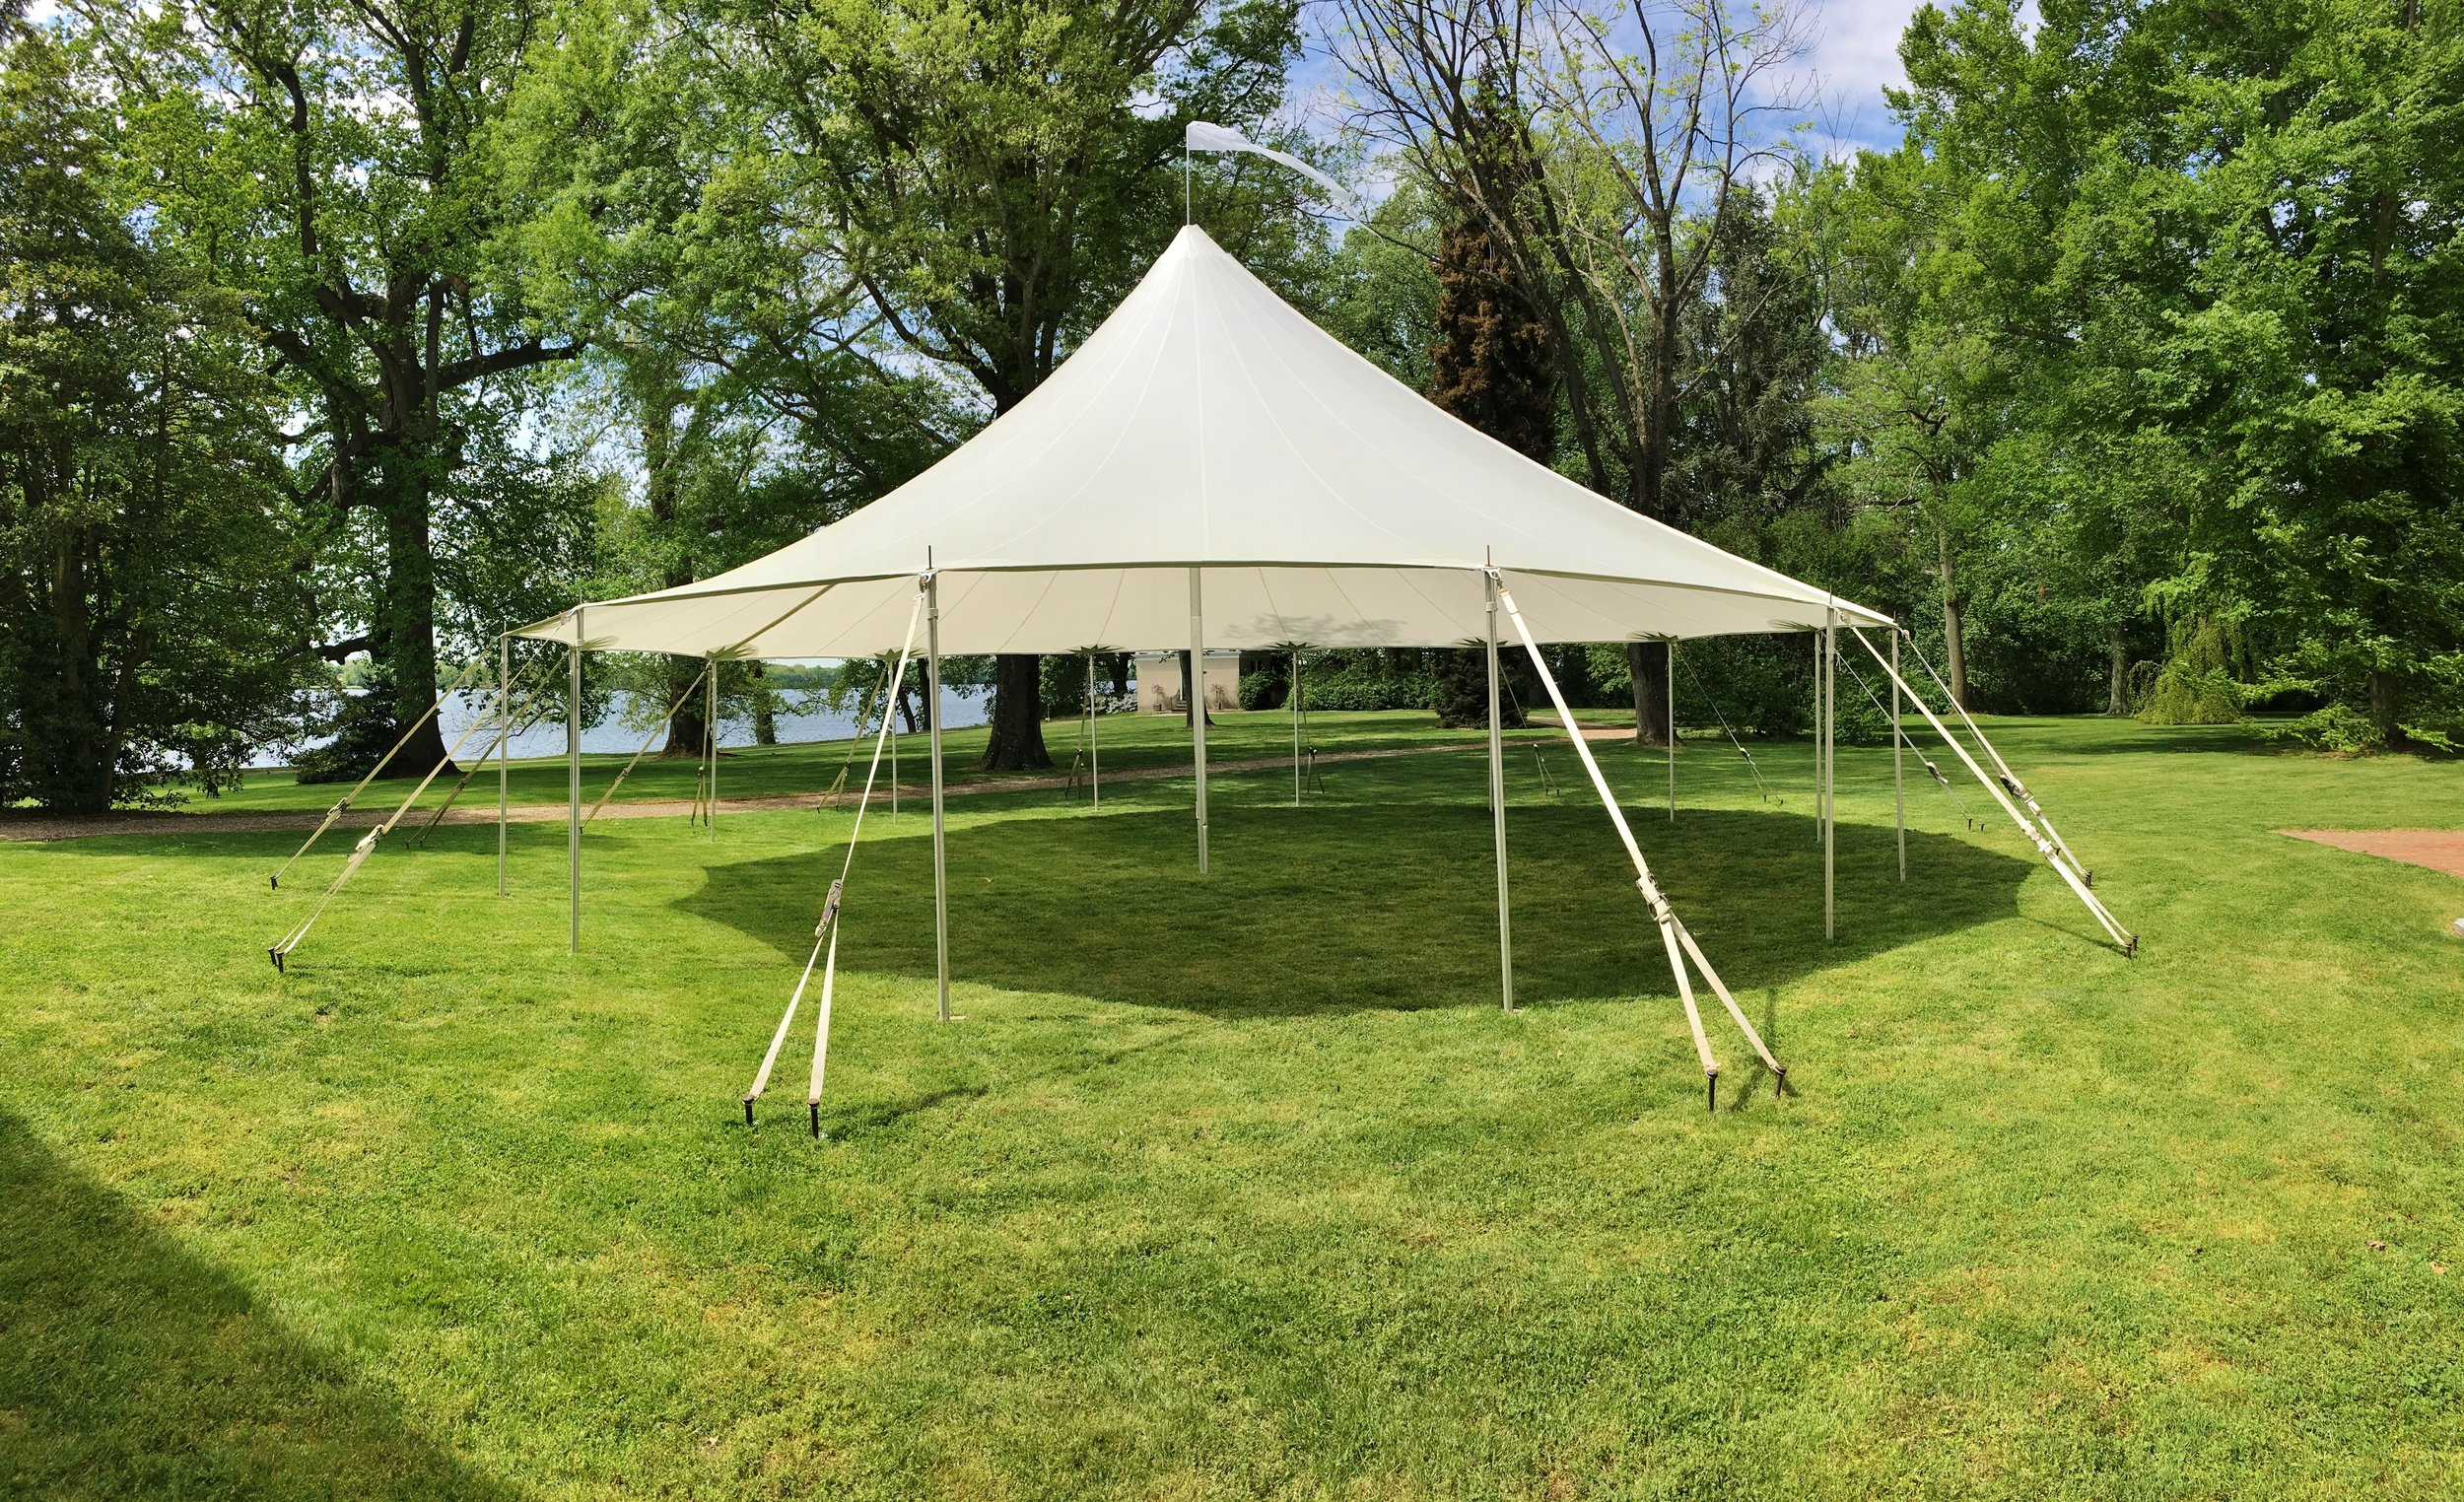 Beautiful sailcloth tent for rent in Washington, DC